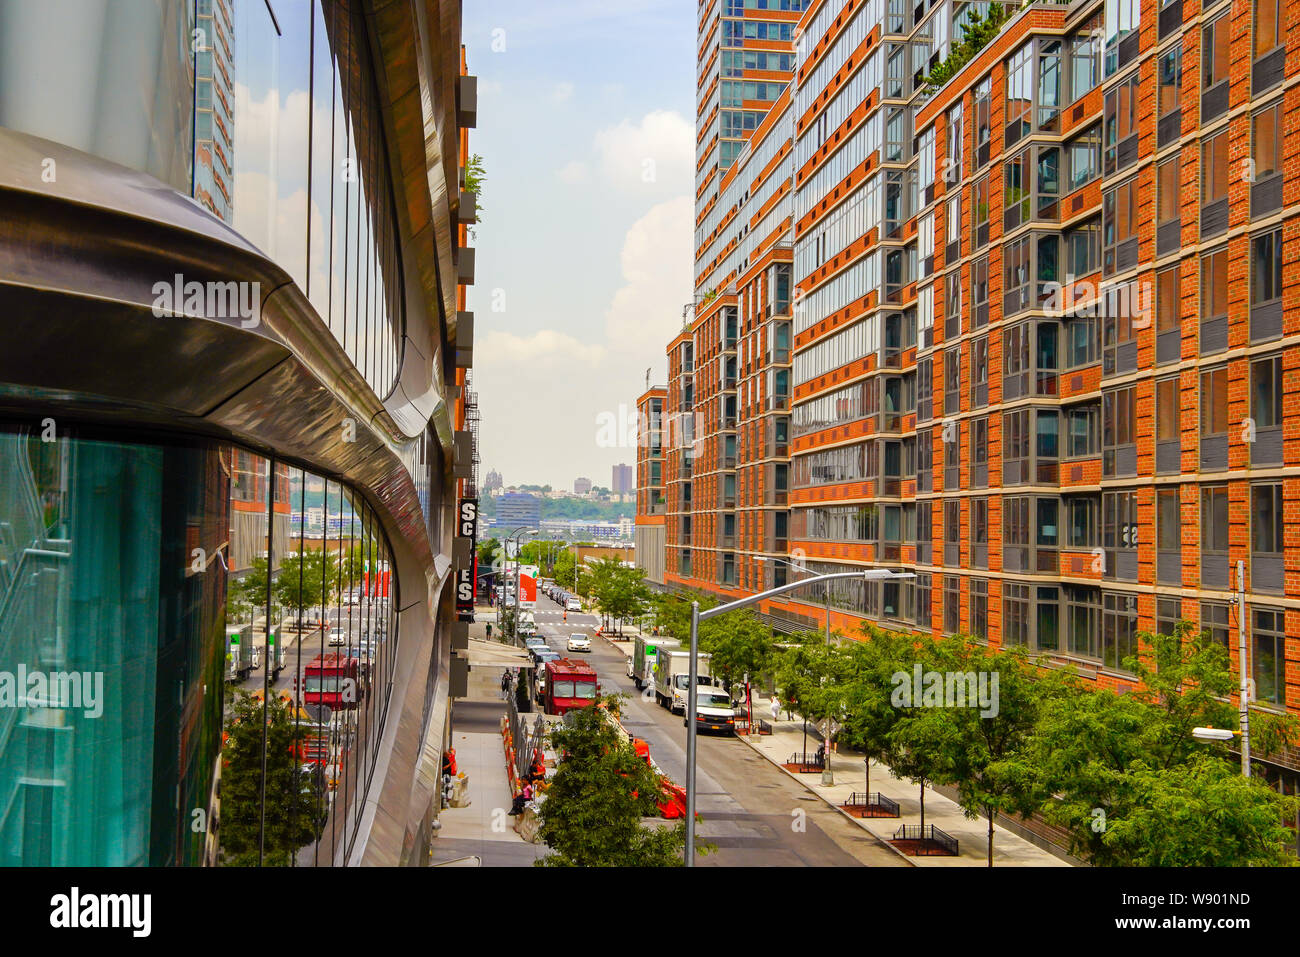 View from, The High Line Park in Manhattan (Hudson Yards). The High Line linear park built on the elevated train tracks above 10th Ave in New York Cit Stock Photo